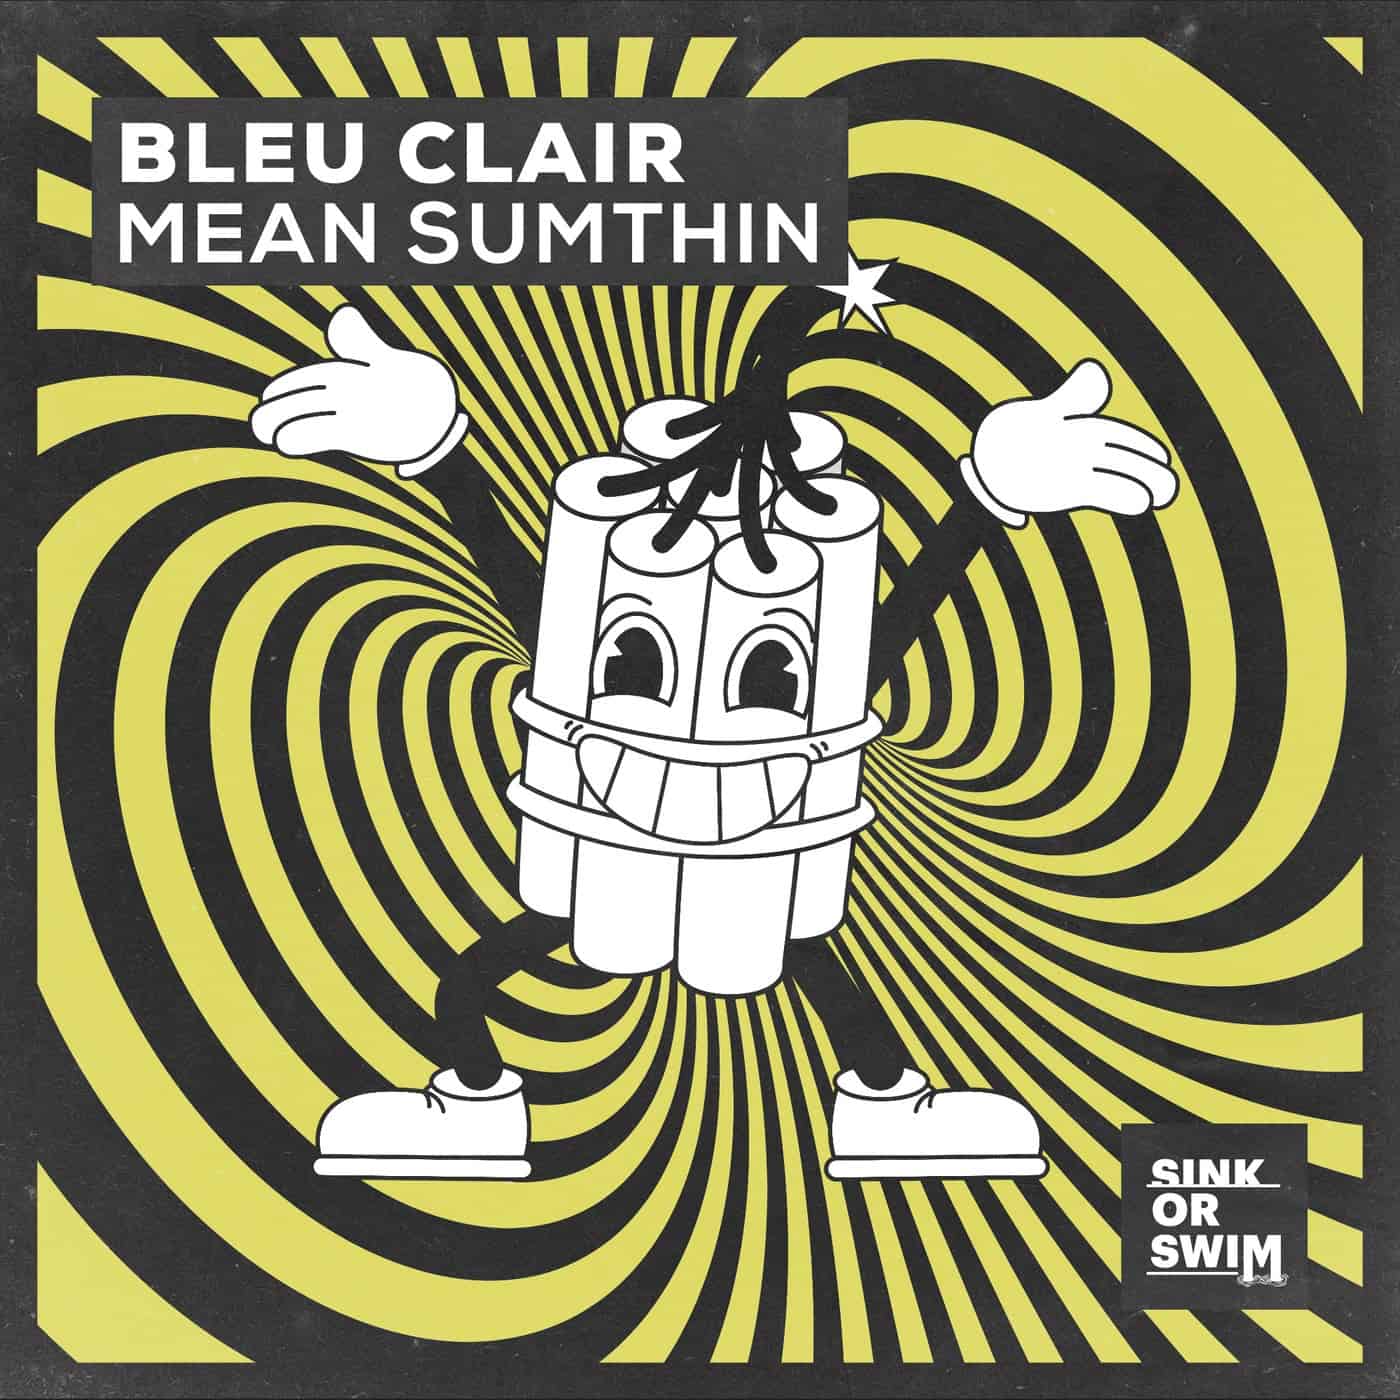 image cover: Mean Sumthin (Extended Mix) by Bleu Clair on Sink or Swim